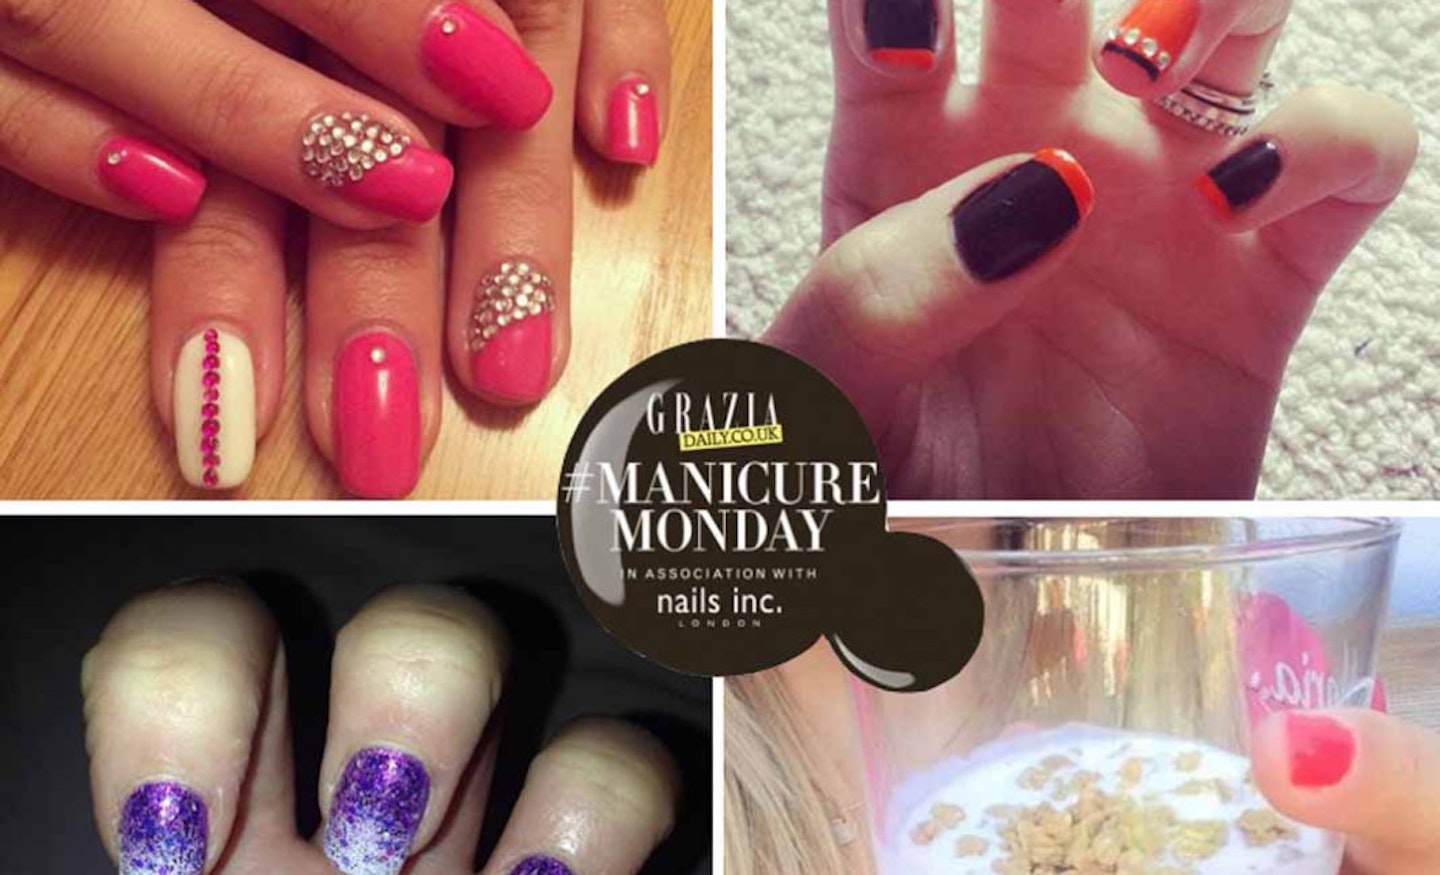 GALLERY >>> See Our Pick Of This Week's Manicure Monday Entries